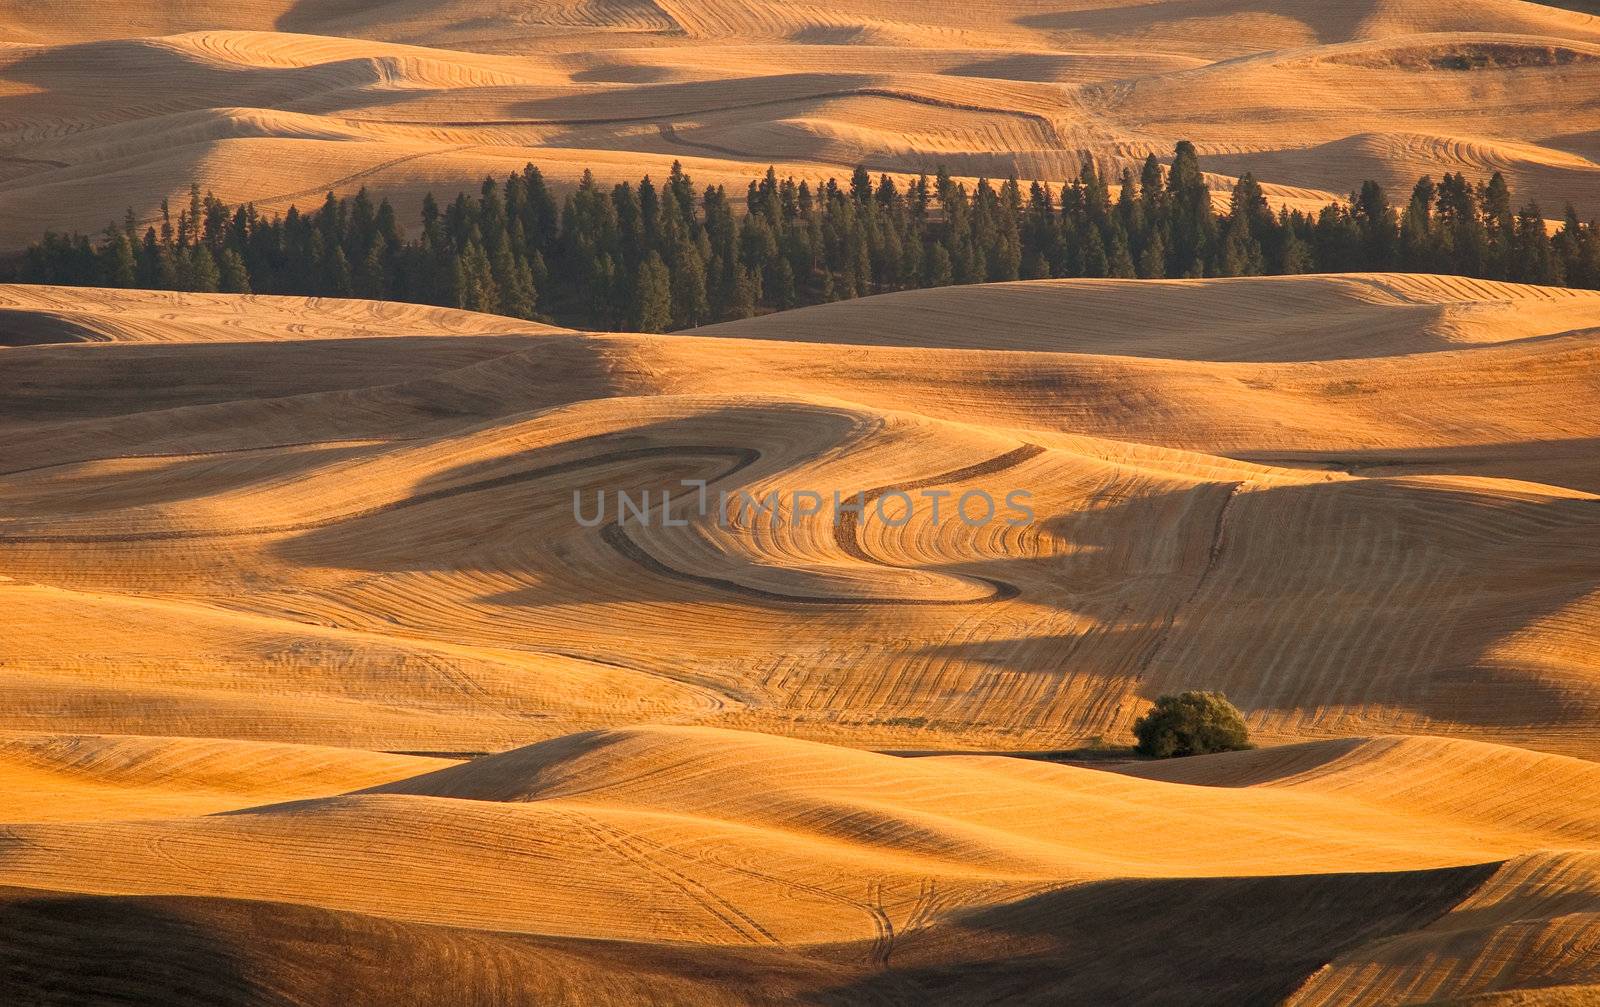 Rolling hills of harvested wheat fields and pine trees, Whitman County, Washington, USA by CharlesBolin